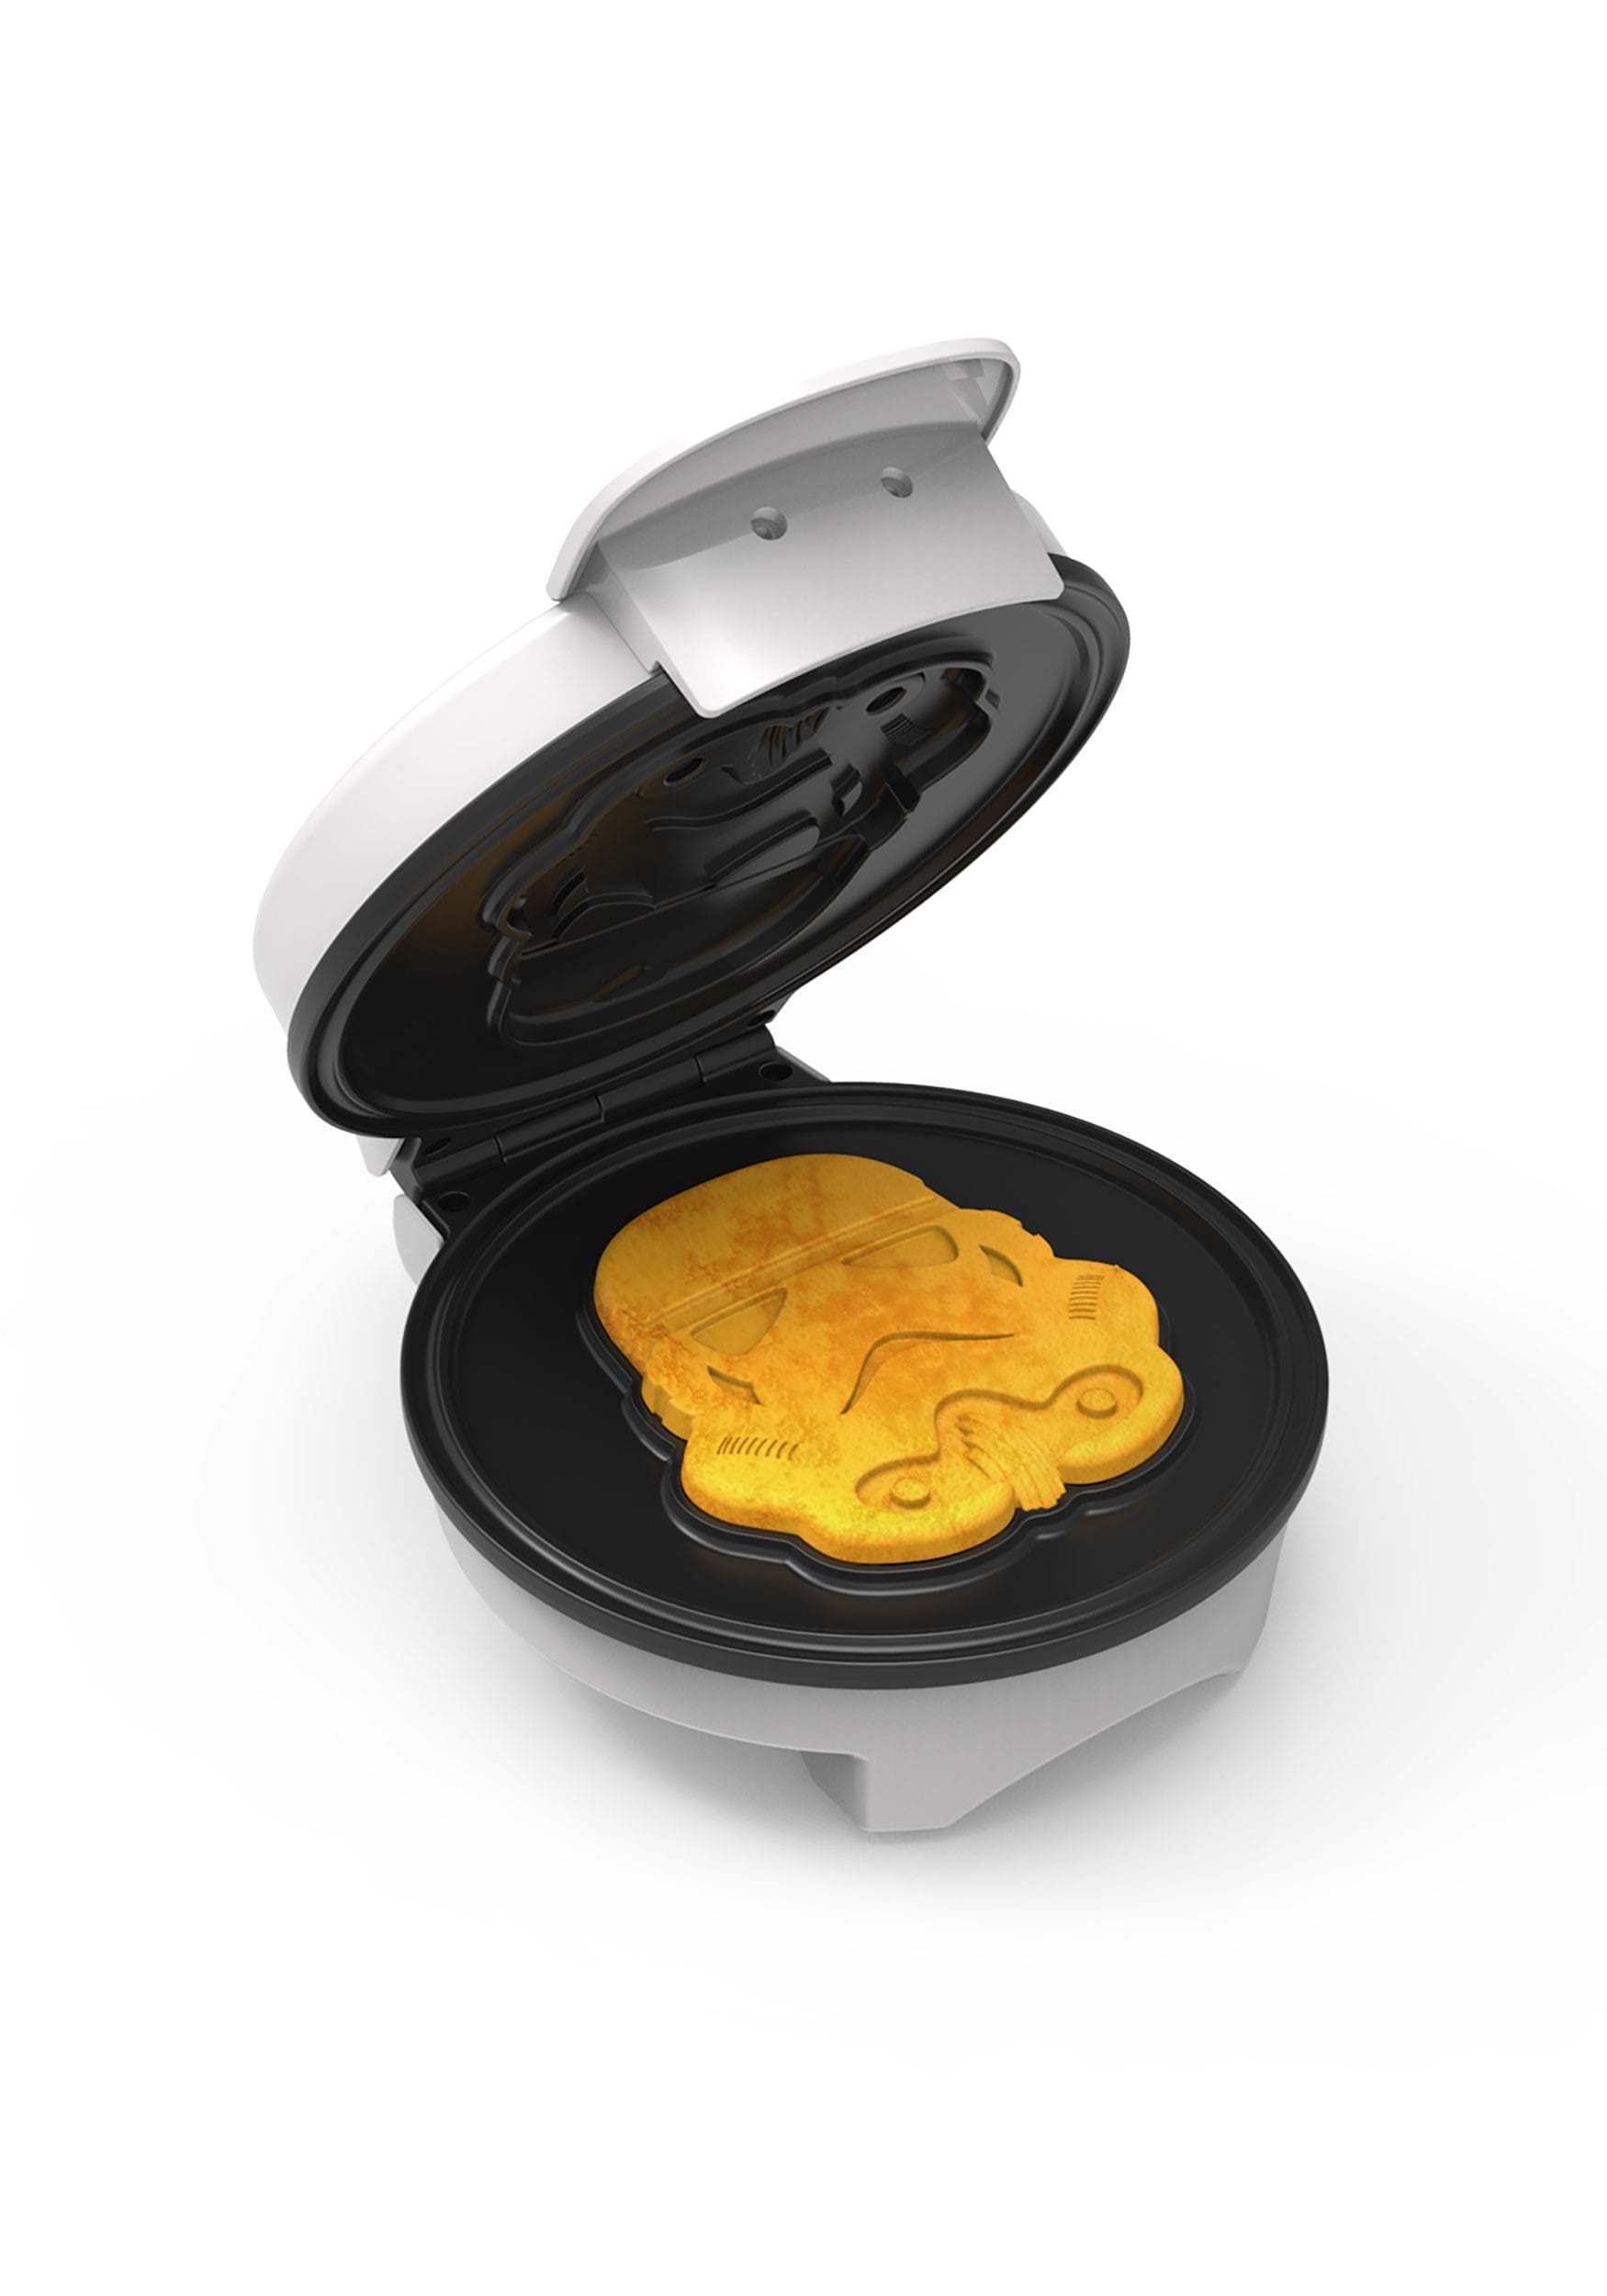 Waffle Iron Star Wars Icon On Your Waffles Star Wars Stormtrooper Waffle Maker